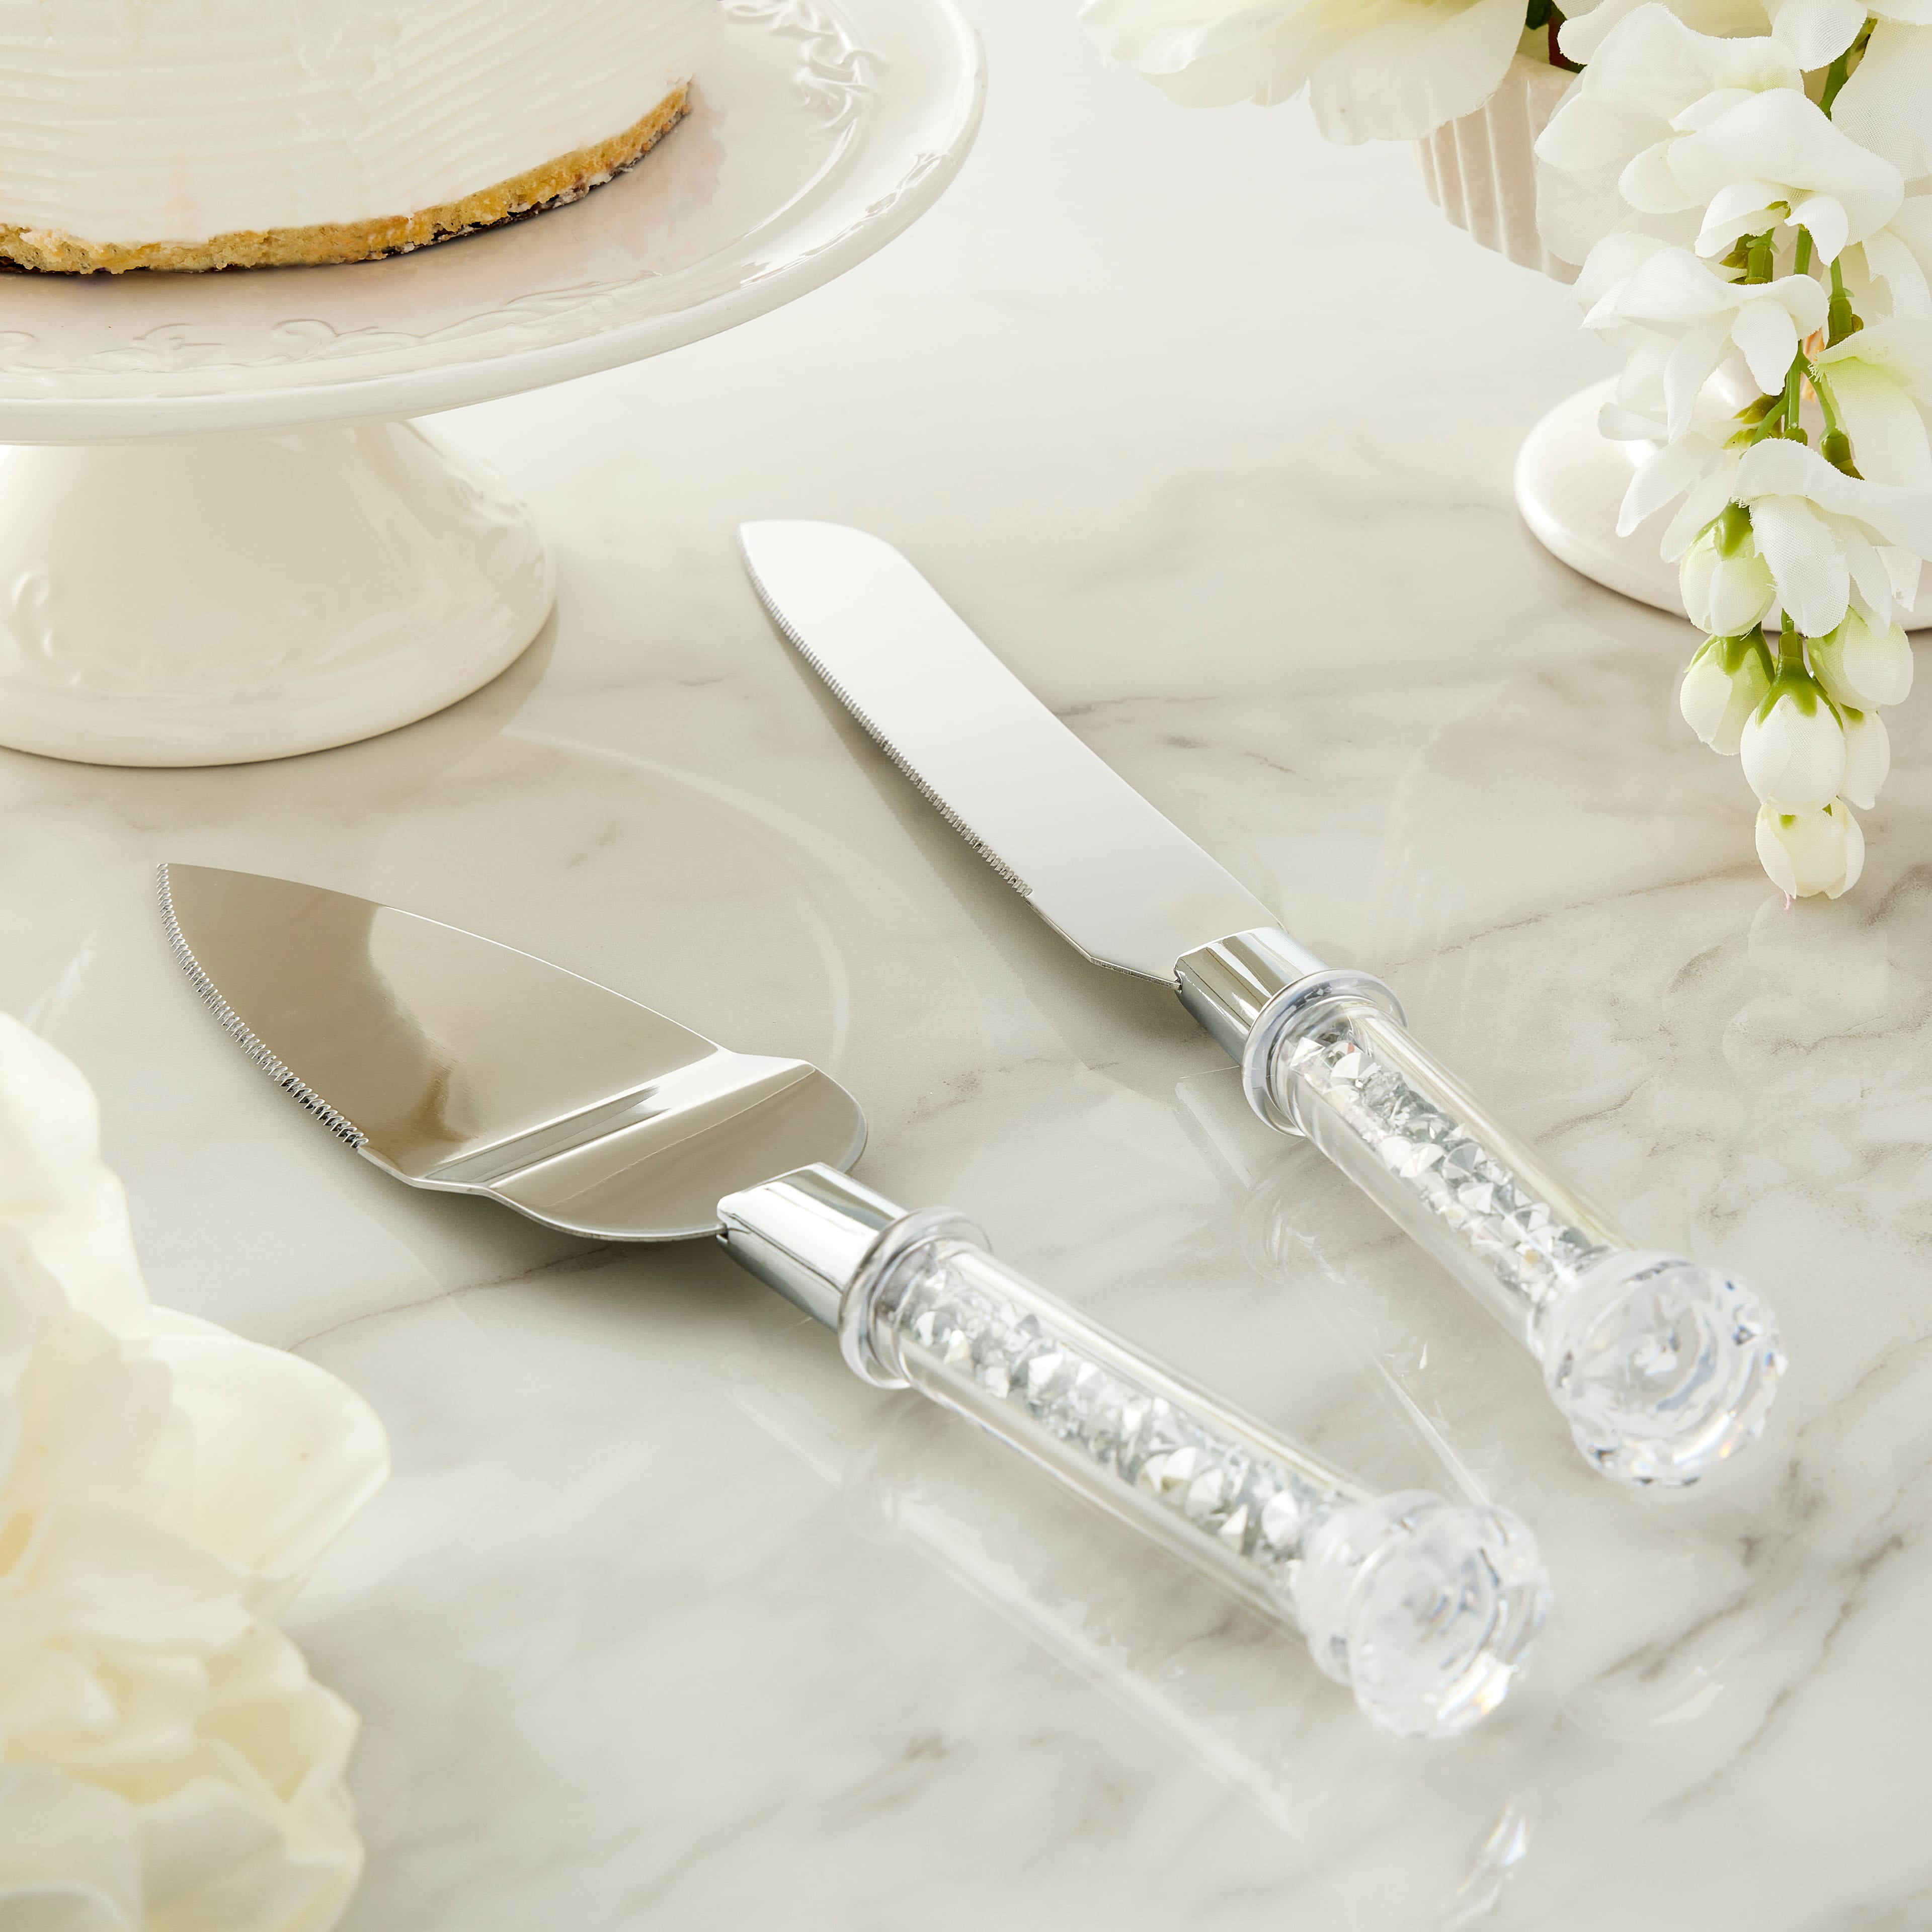 GIFTS INFINITY Mis Quince Anos Sweet Elegant 12 Stainless Steel Wedding  Cake Knife, Serving Set, valentine's day Cake Knife